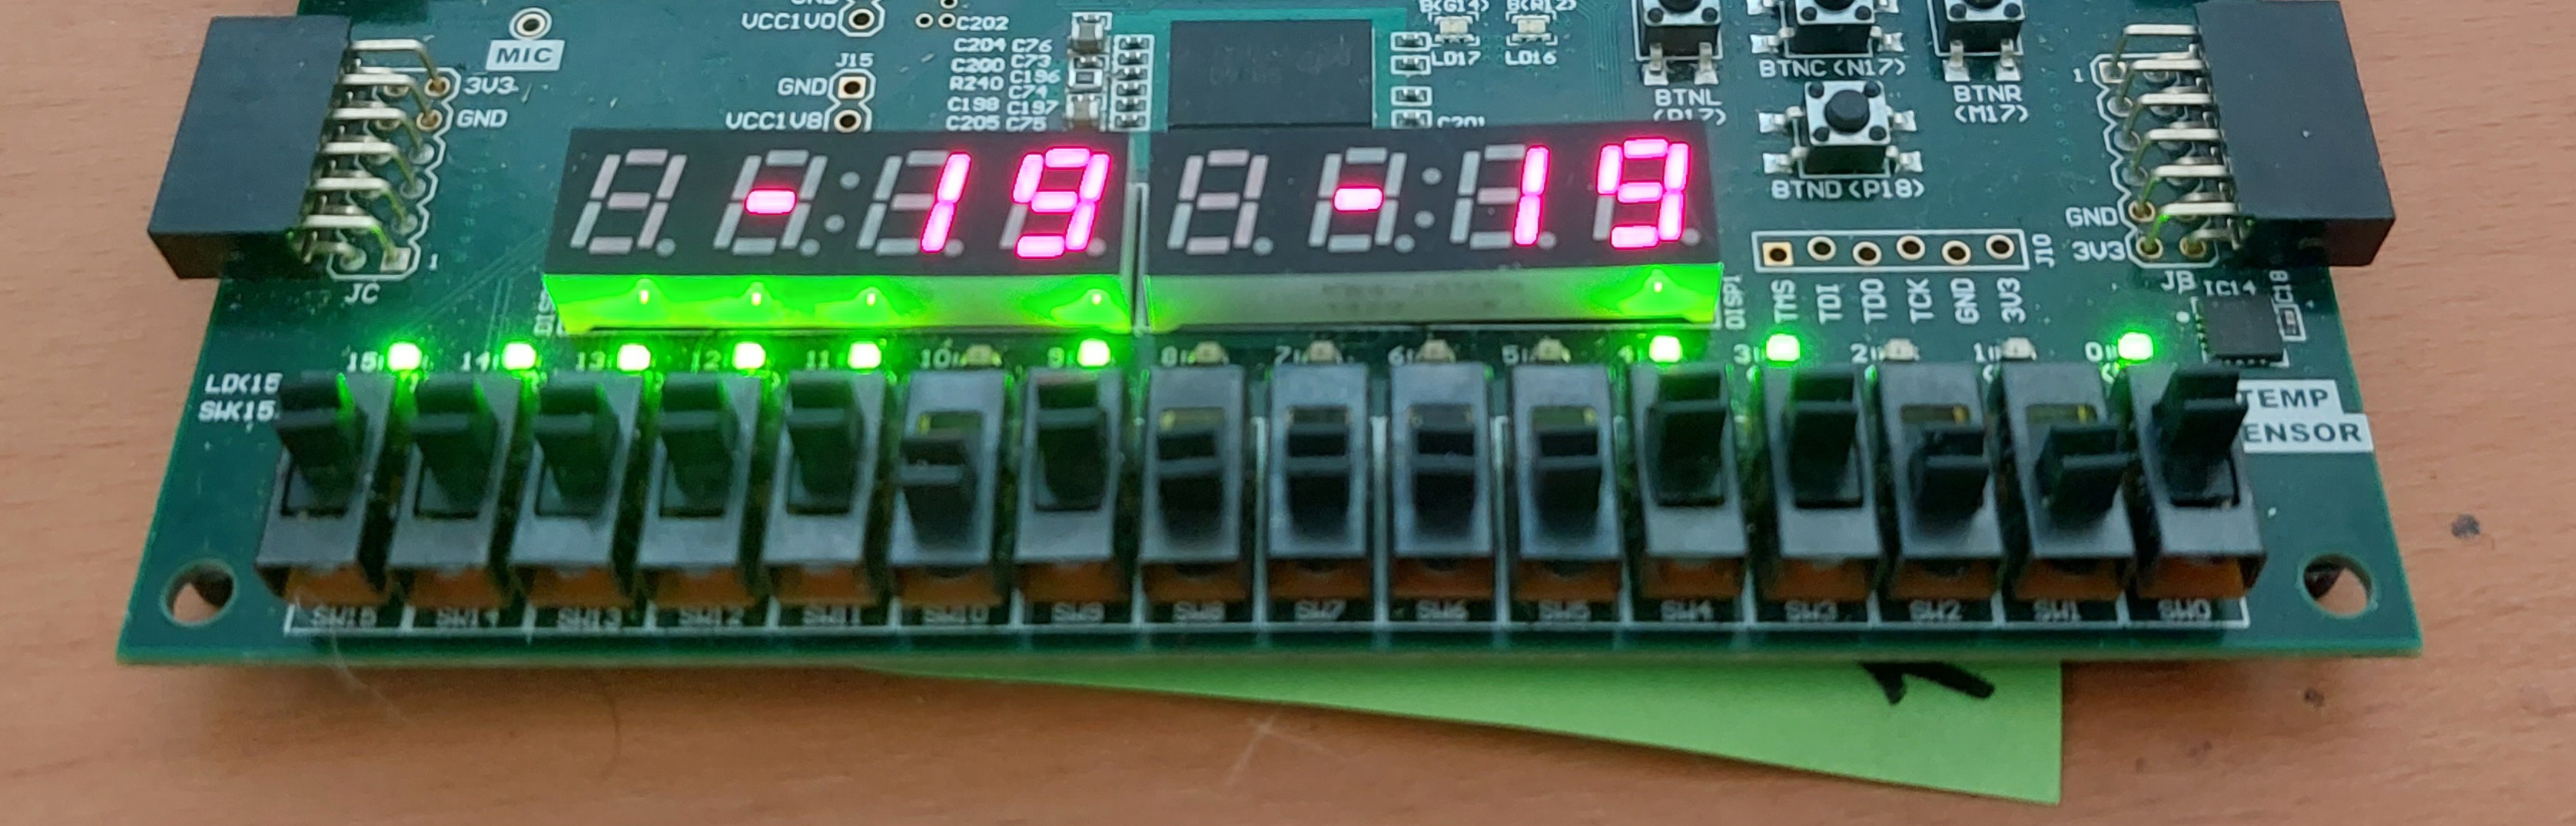 The seven segment displays working, their values set by the switches